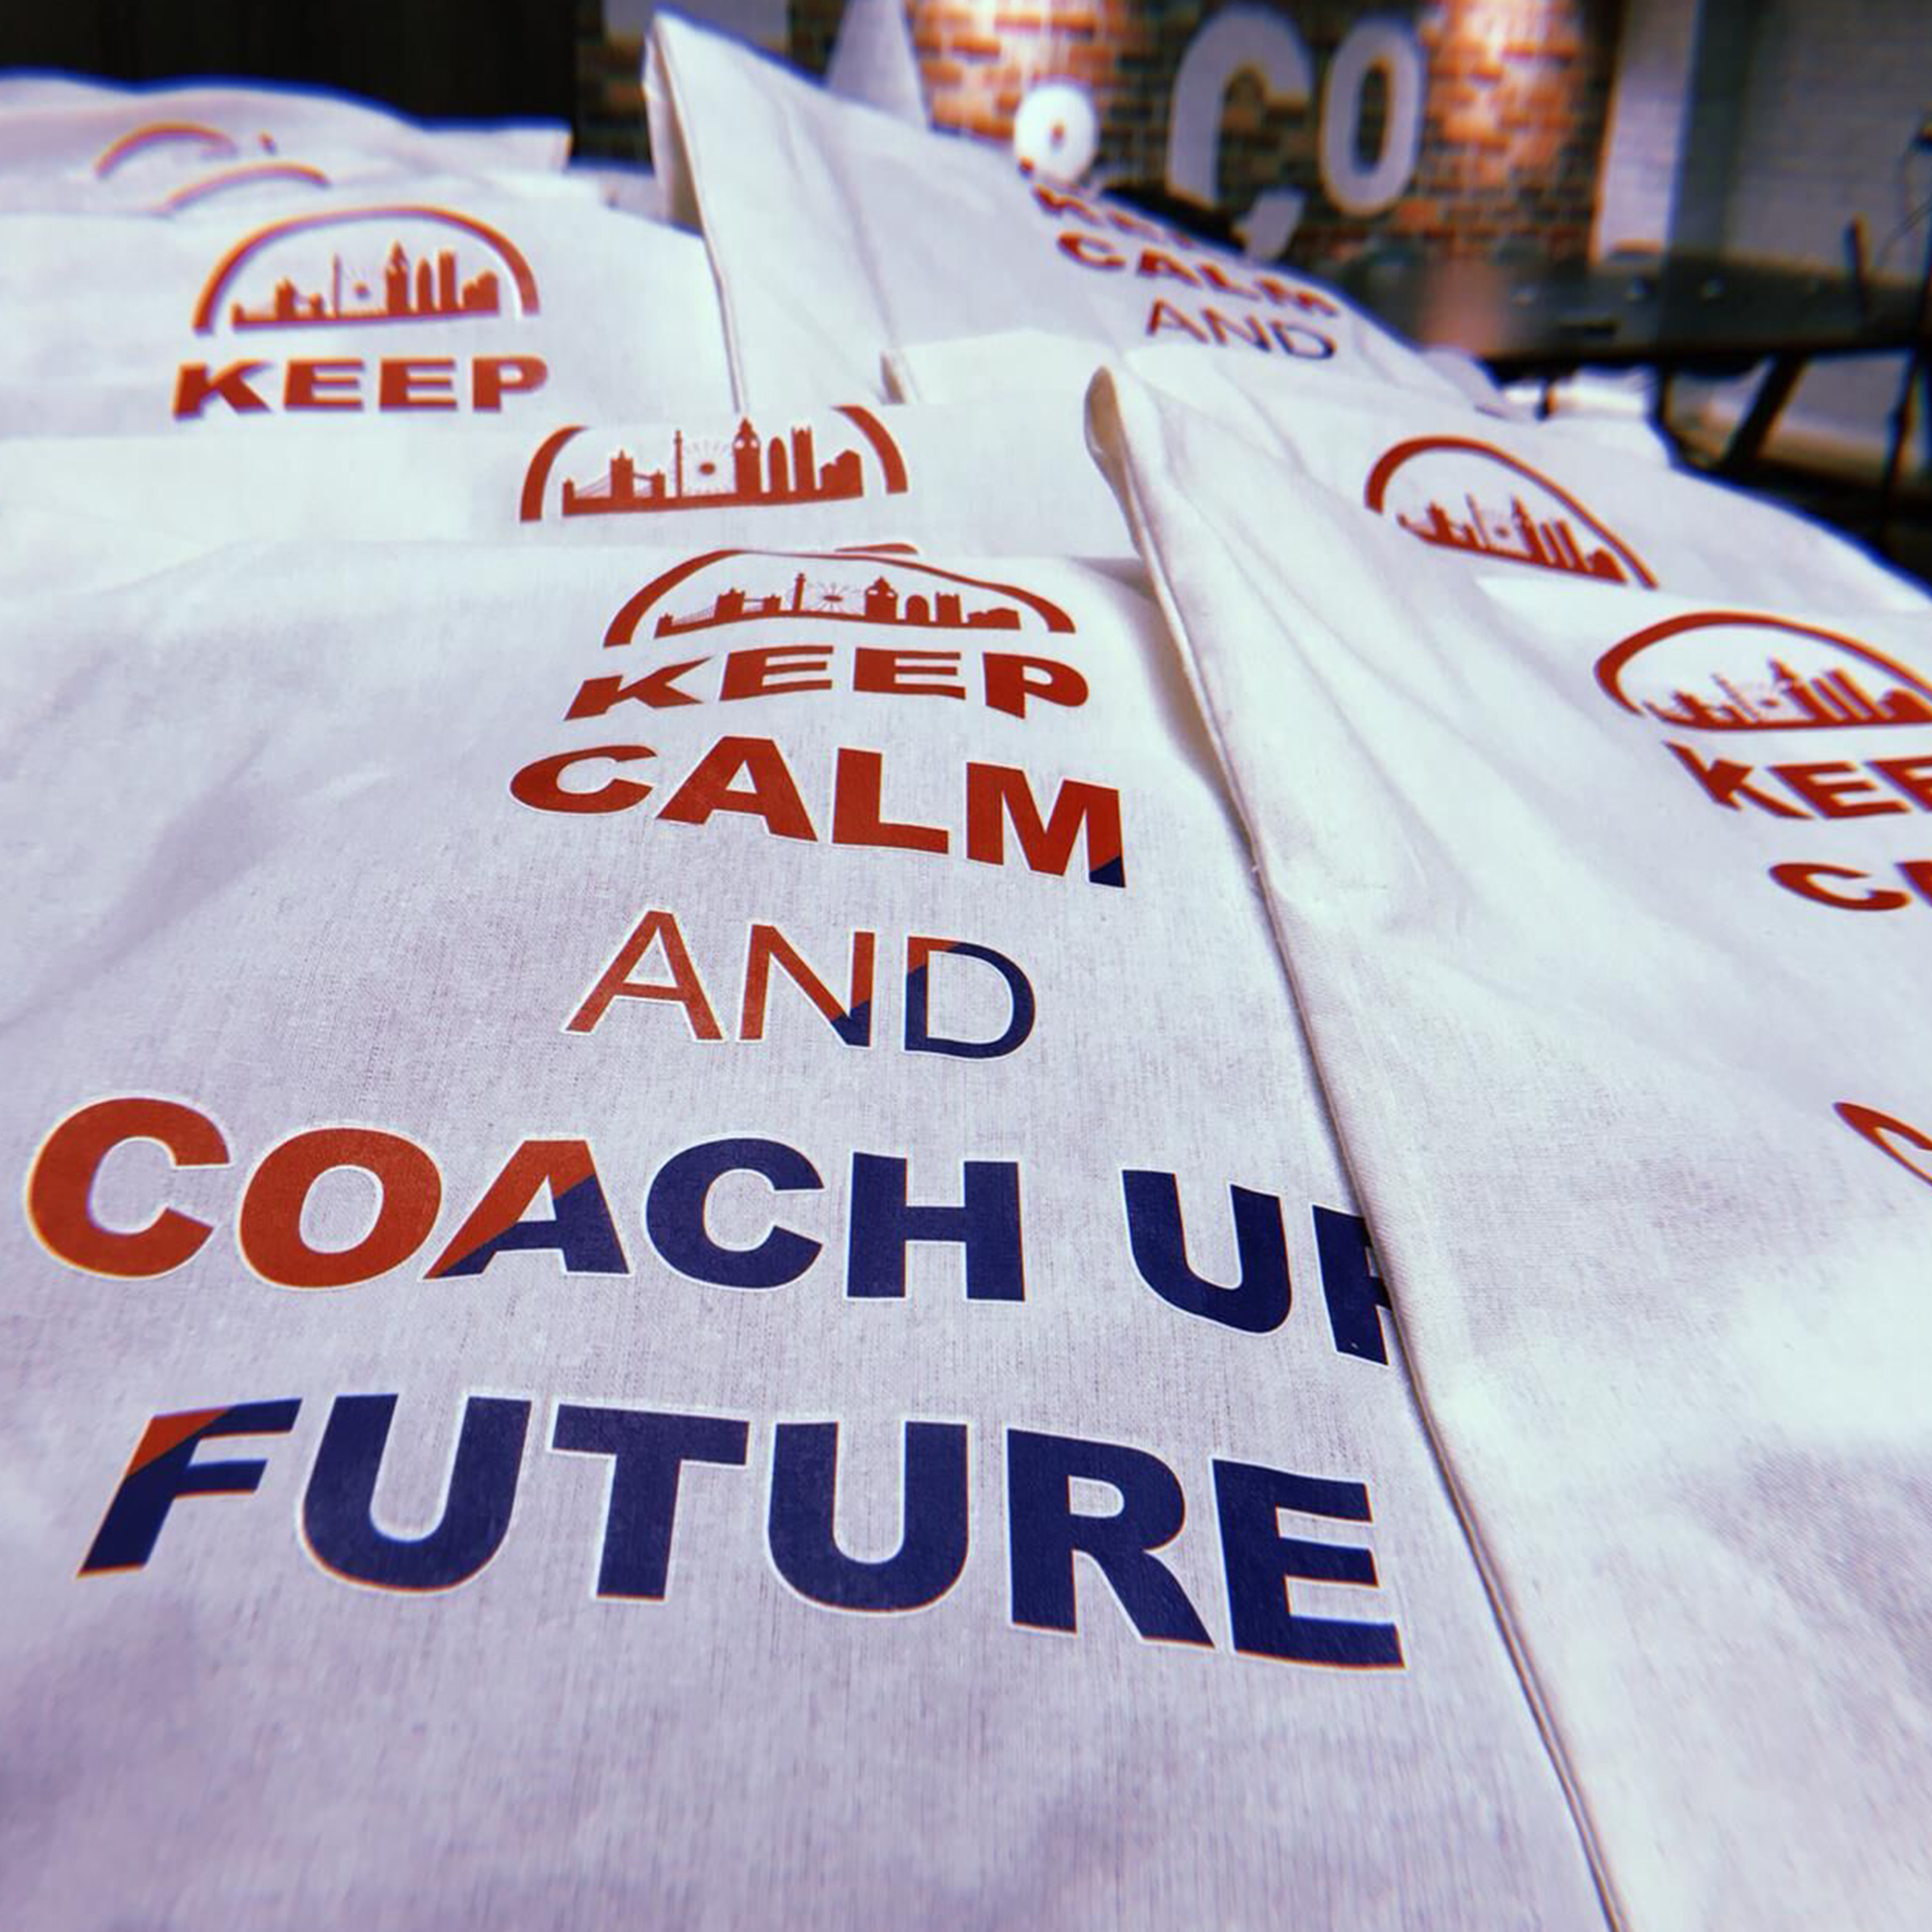 Keep calm and coach up future tote bags.